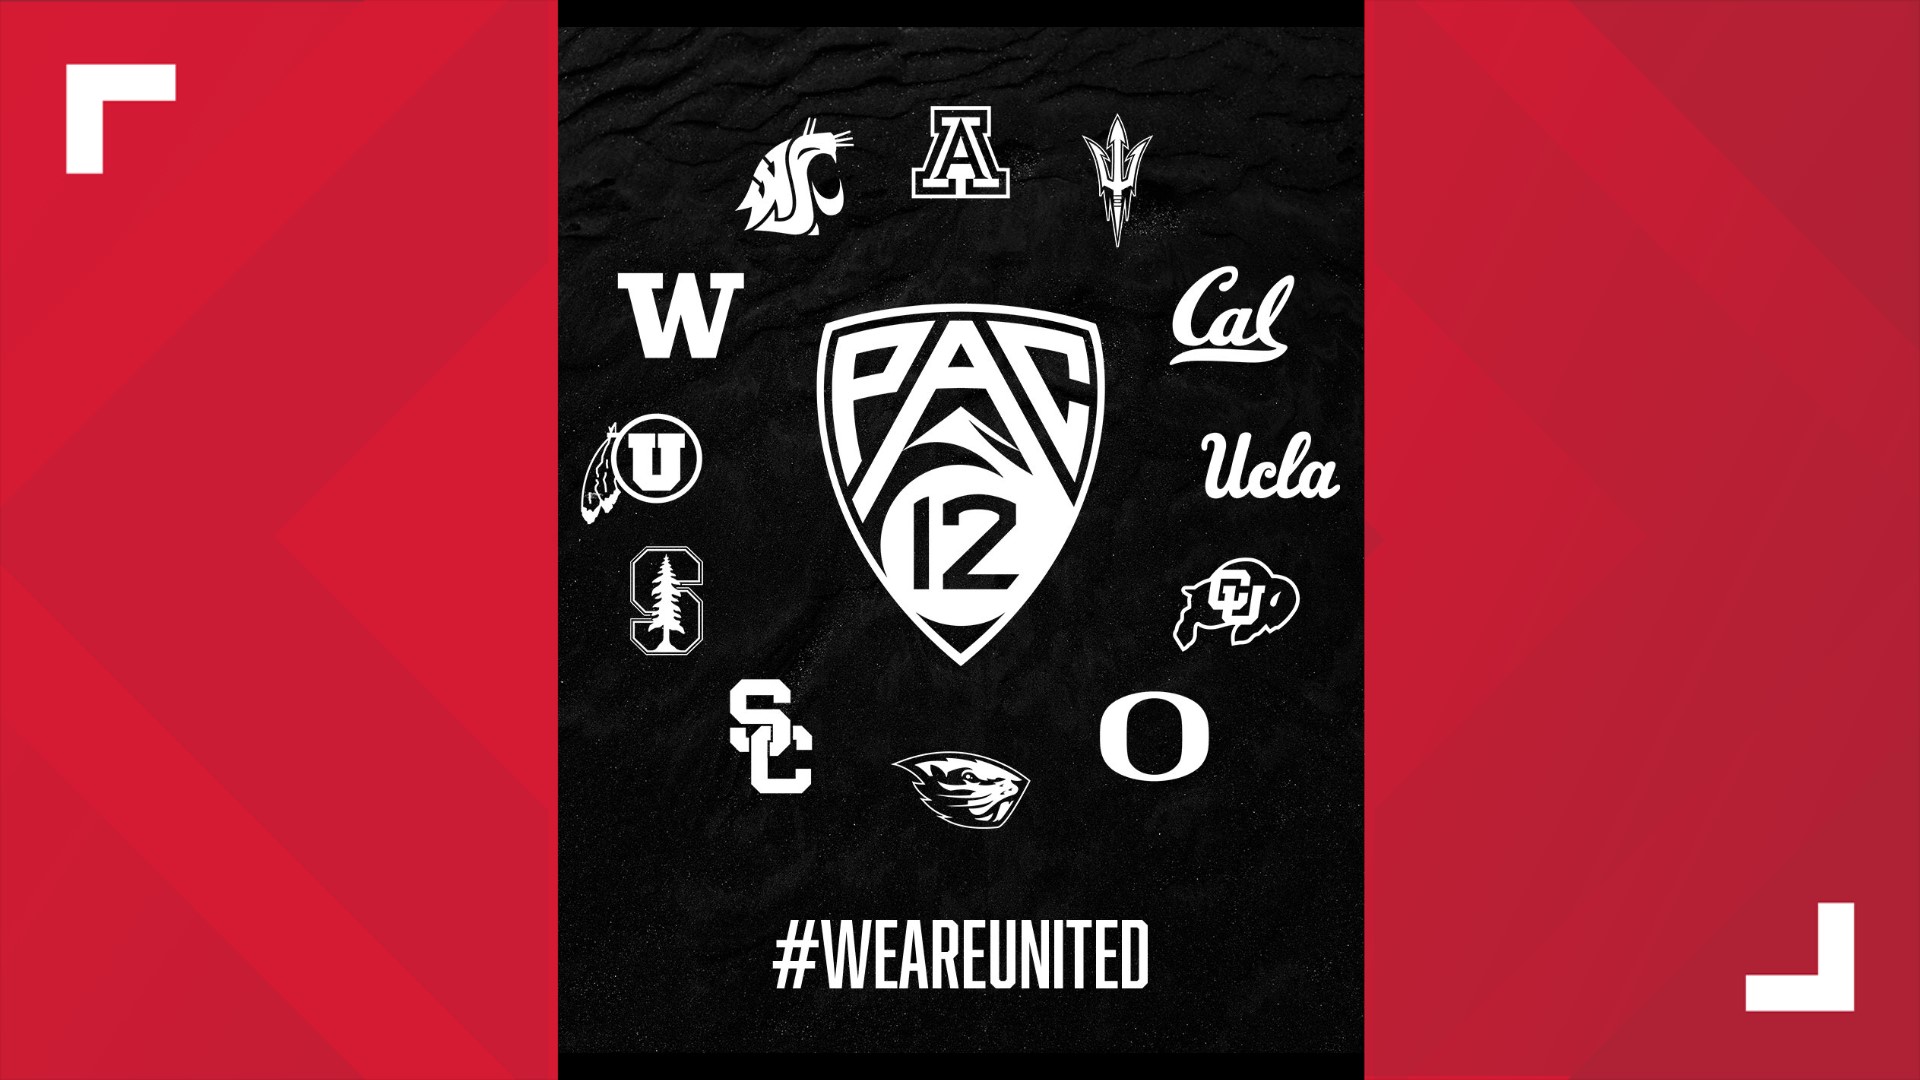 A group of Pac-12 players is threatening to opt out of this season if the conference doesn't meet their demands on injustice and safety during the pandemic.ii